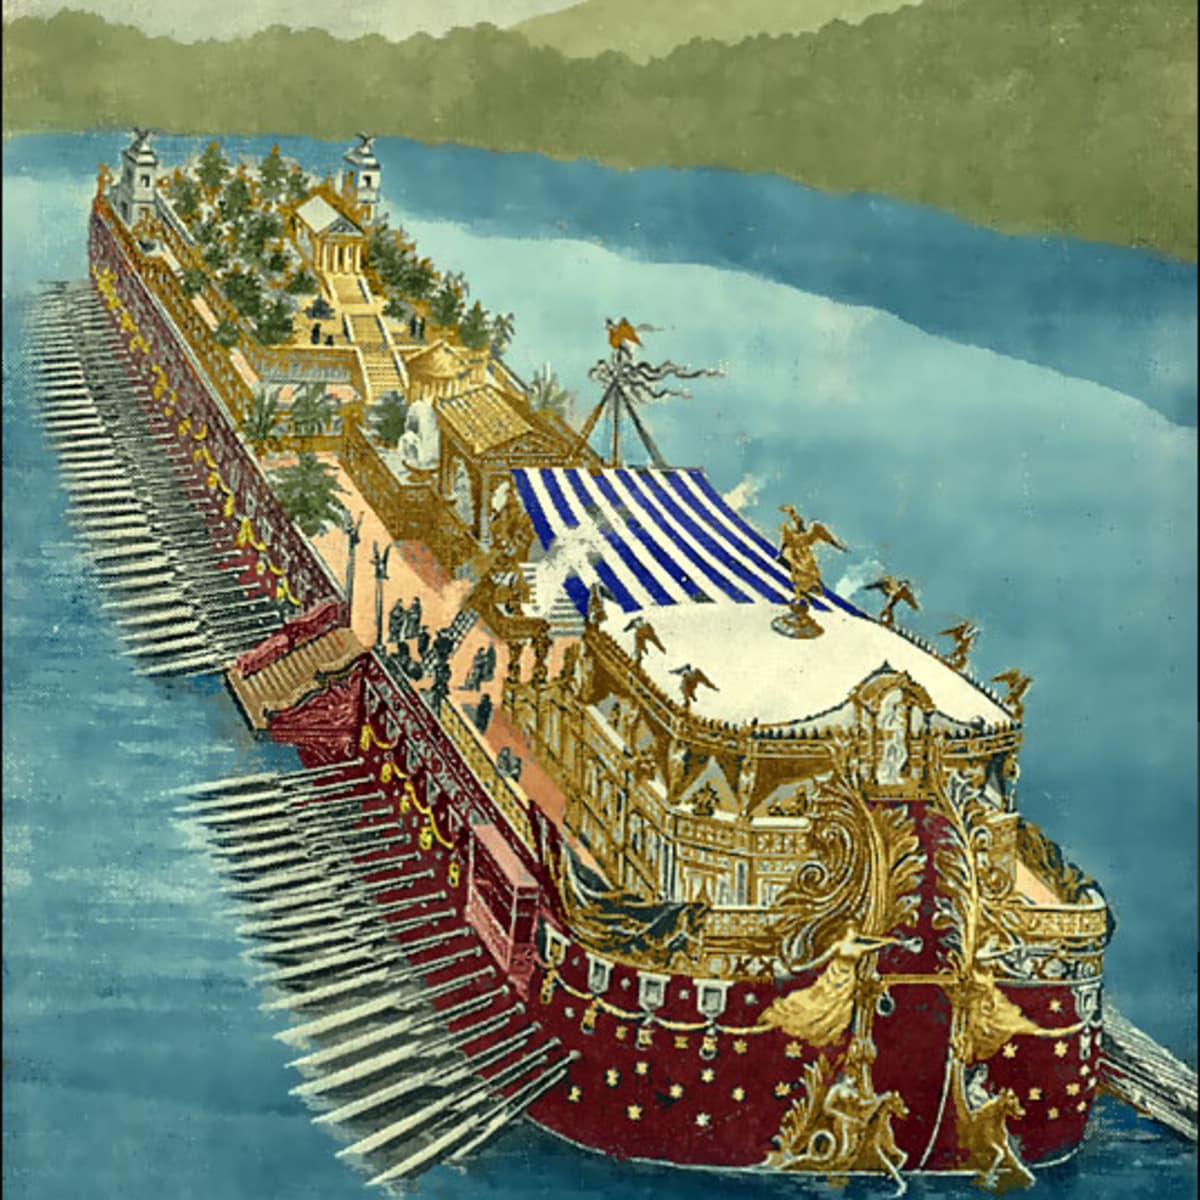 Roman Emperor Caligula and the fantastic Nemi Barges discovered at the bottom of the lake.